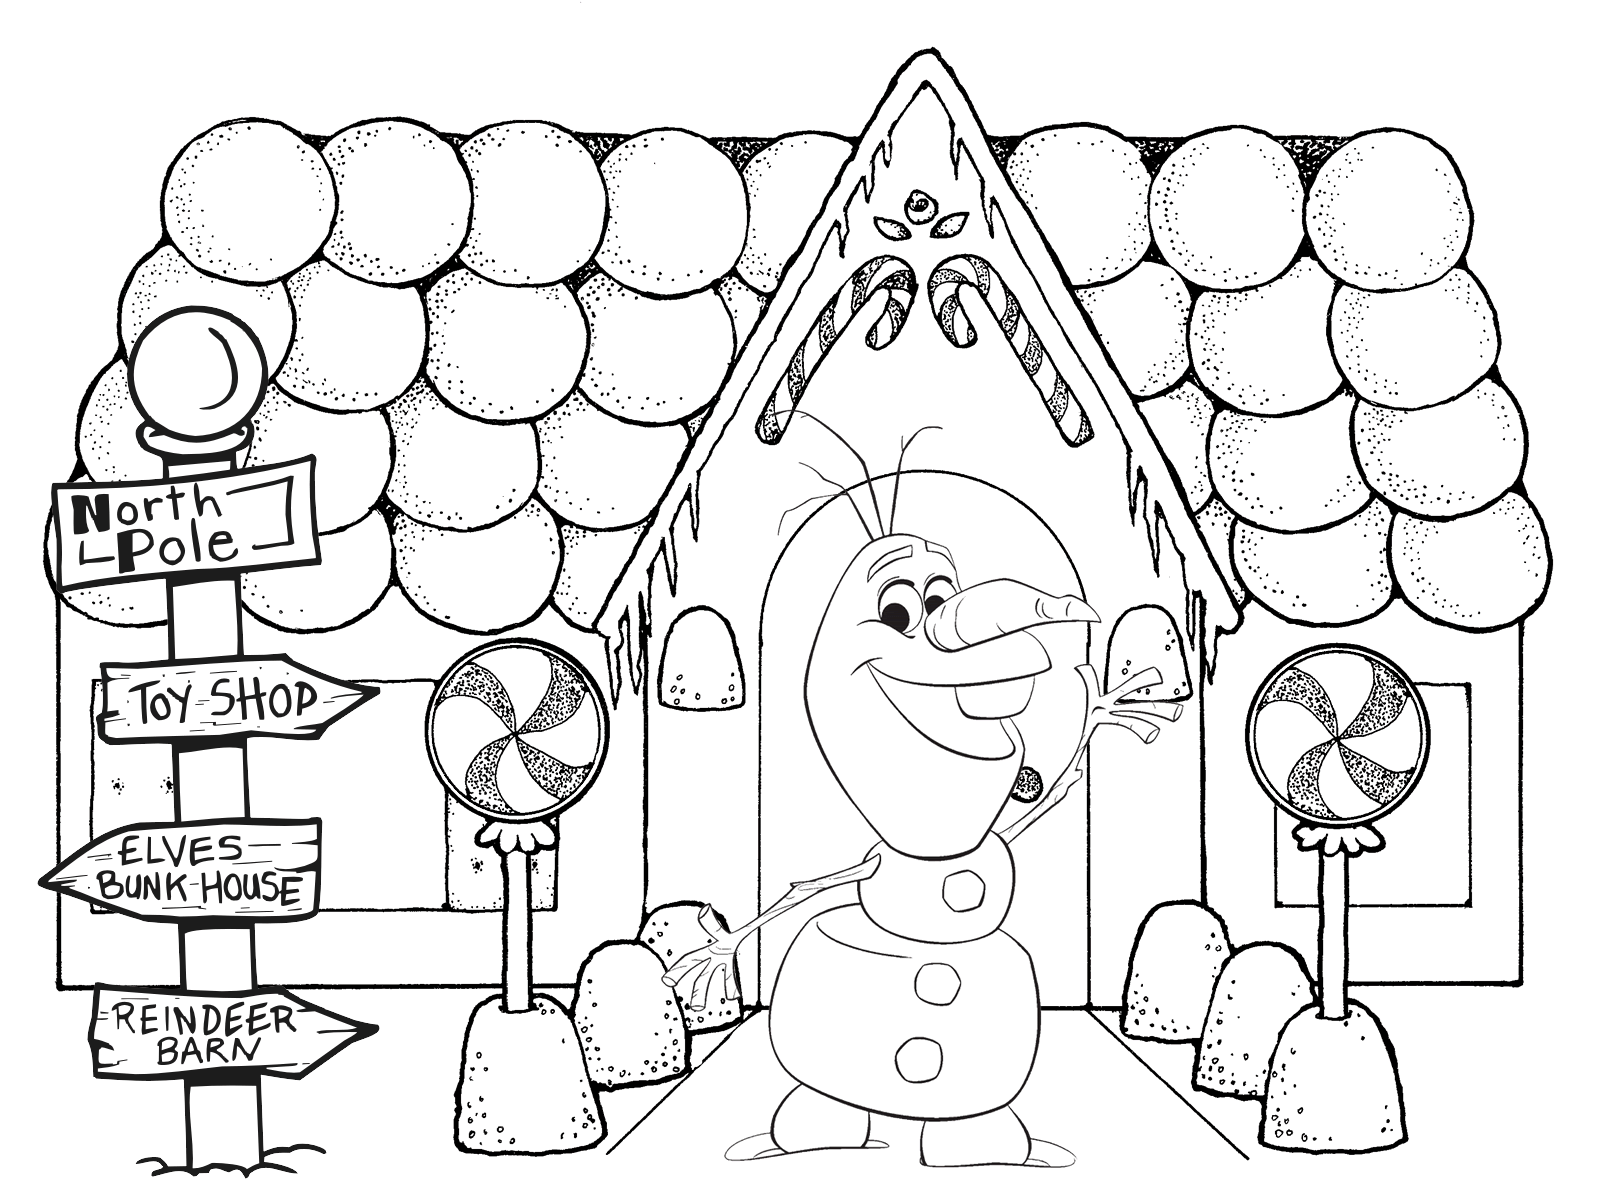 Olaf in a Gingerbread House Coloring Page